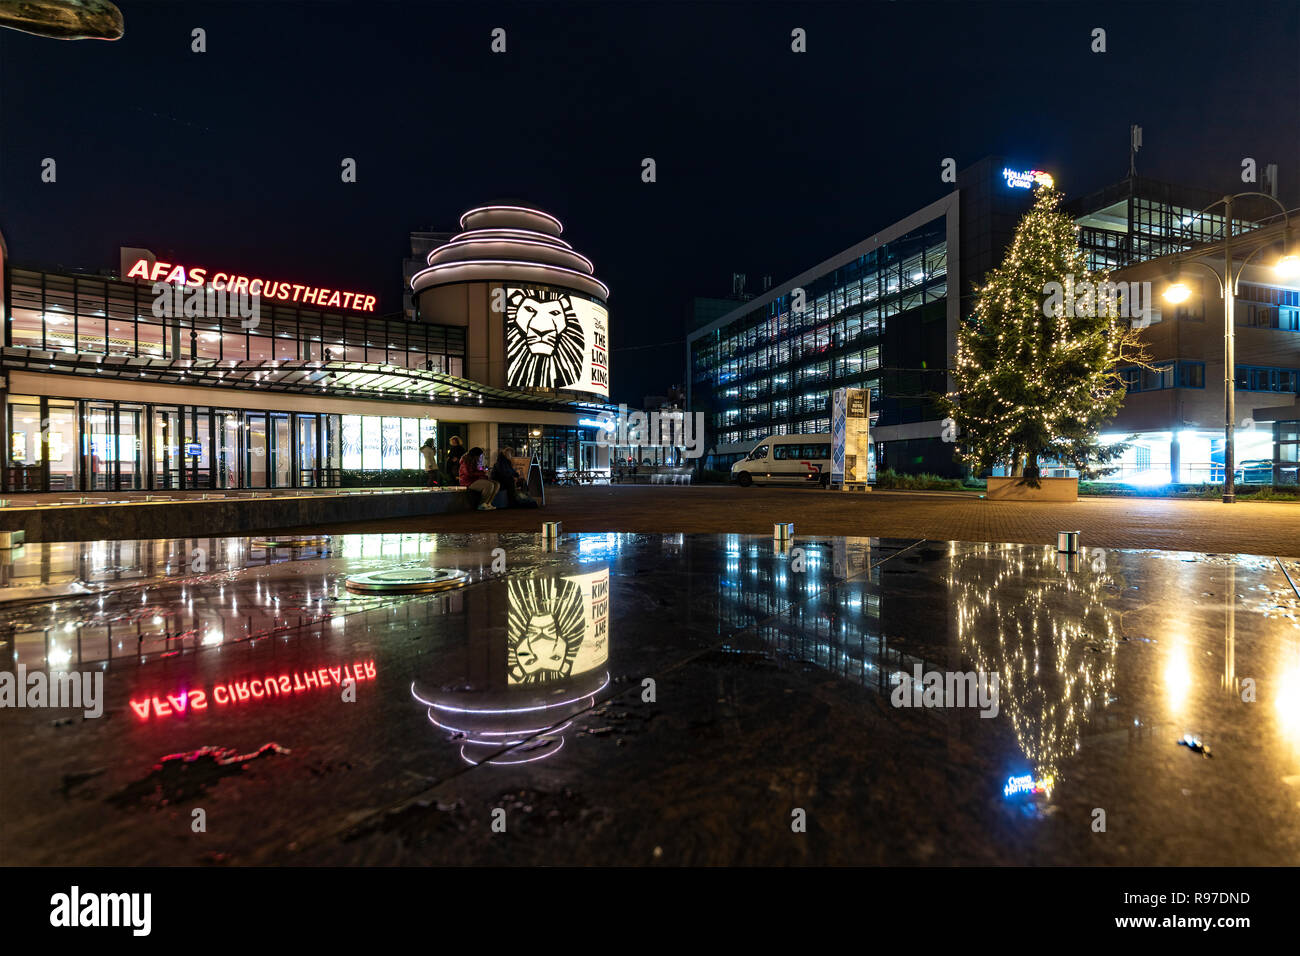 SCHEVENINGEN, 19 December 2018 - Night Christmas decoration of the Circus Theater reflection in The Hague, Netherlands Stock Photo